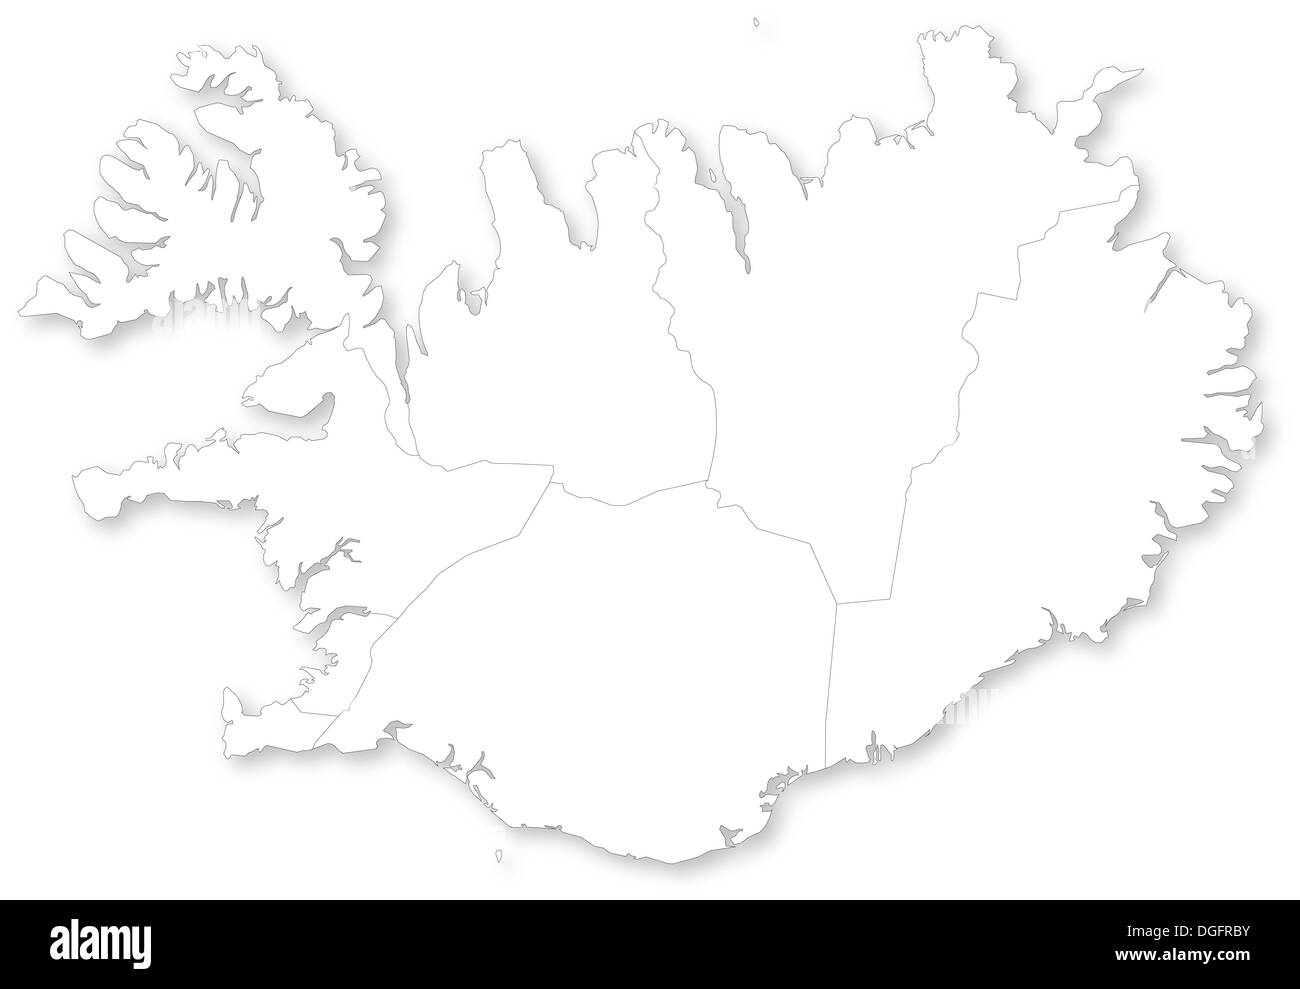 Map of Iceland with regions with shadow. Projected in WGS 84 World Mercator (EPSG:3395) coordinate system. Stock Photo